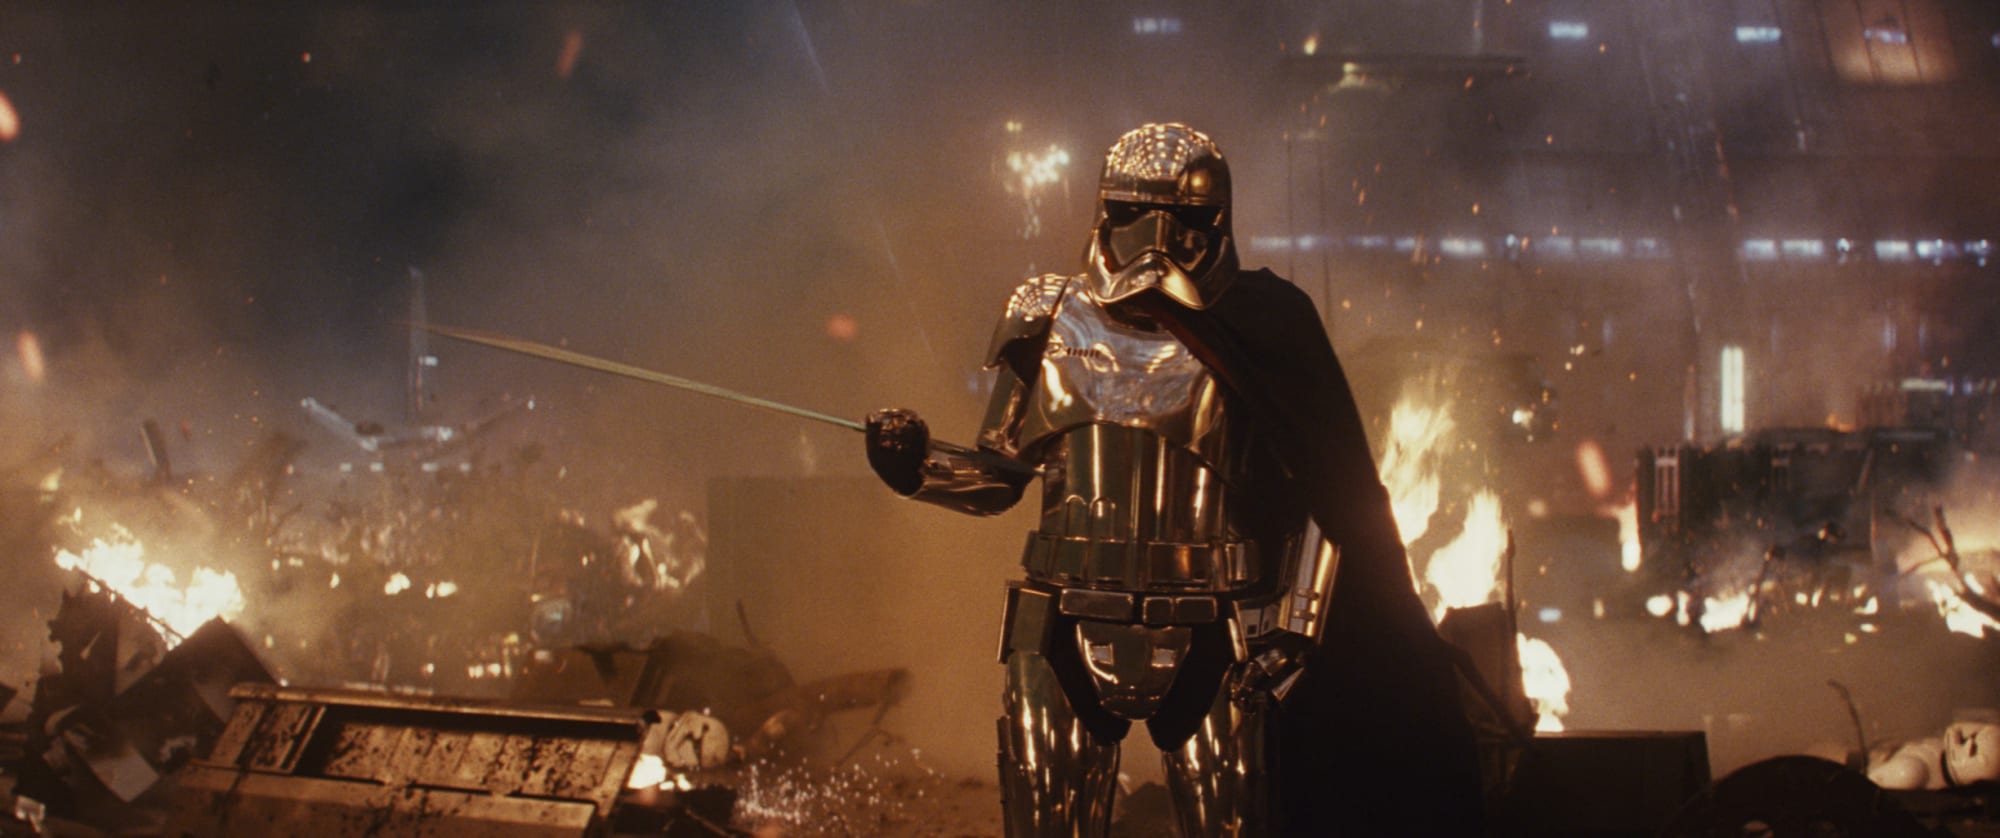 Twitter is pretty sure Star Wars fan shouldn’t name his daughter Captain Phasma